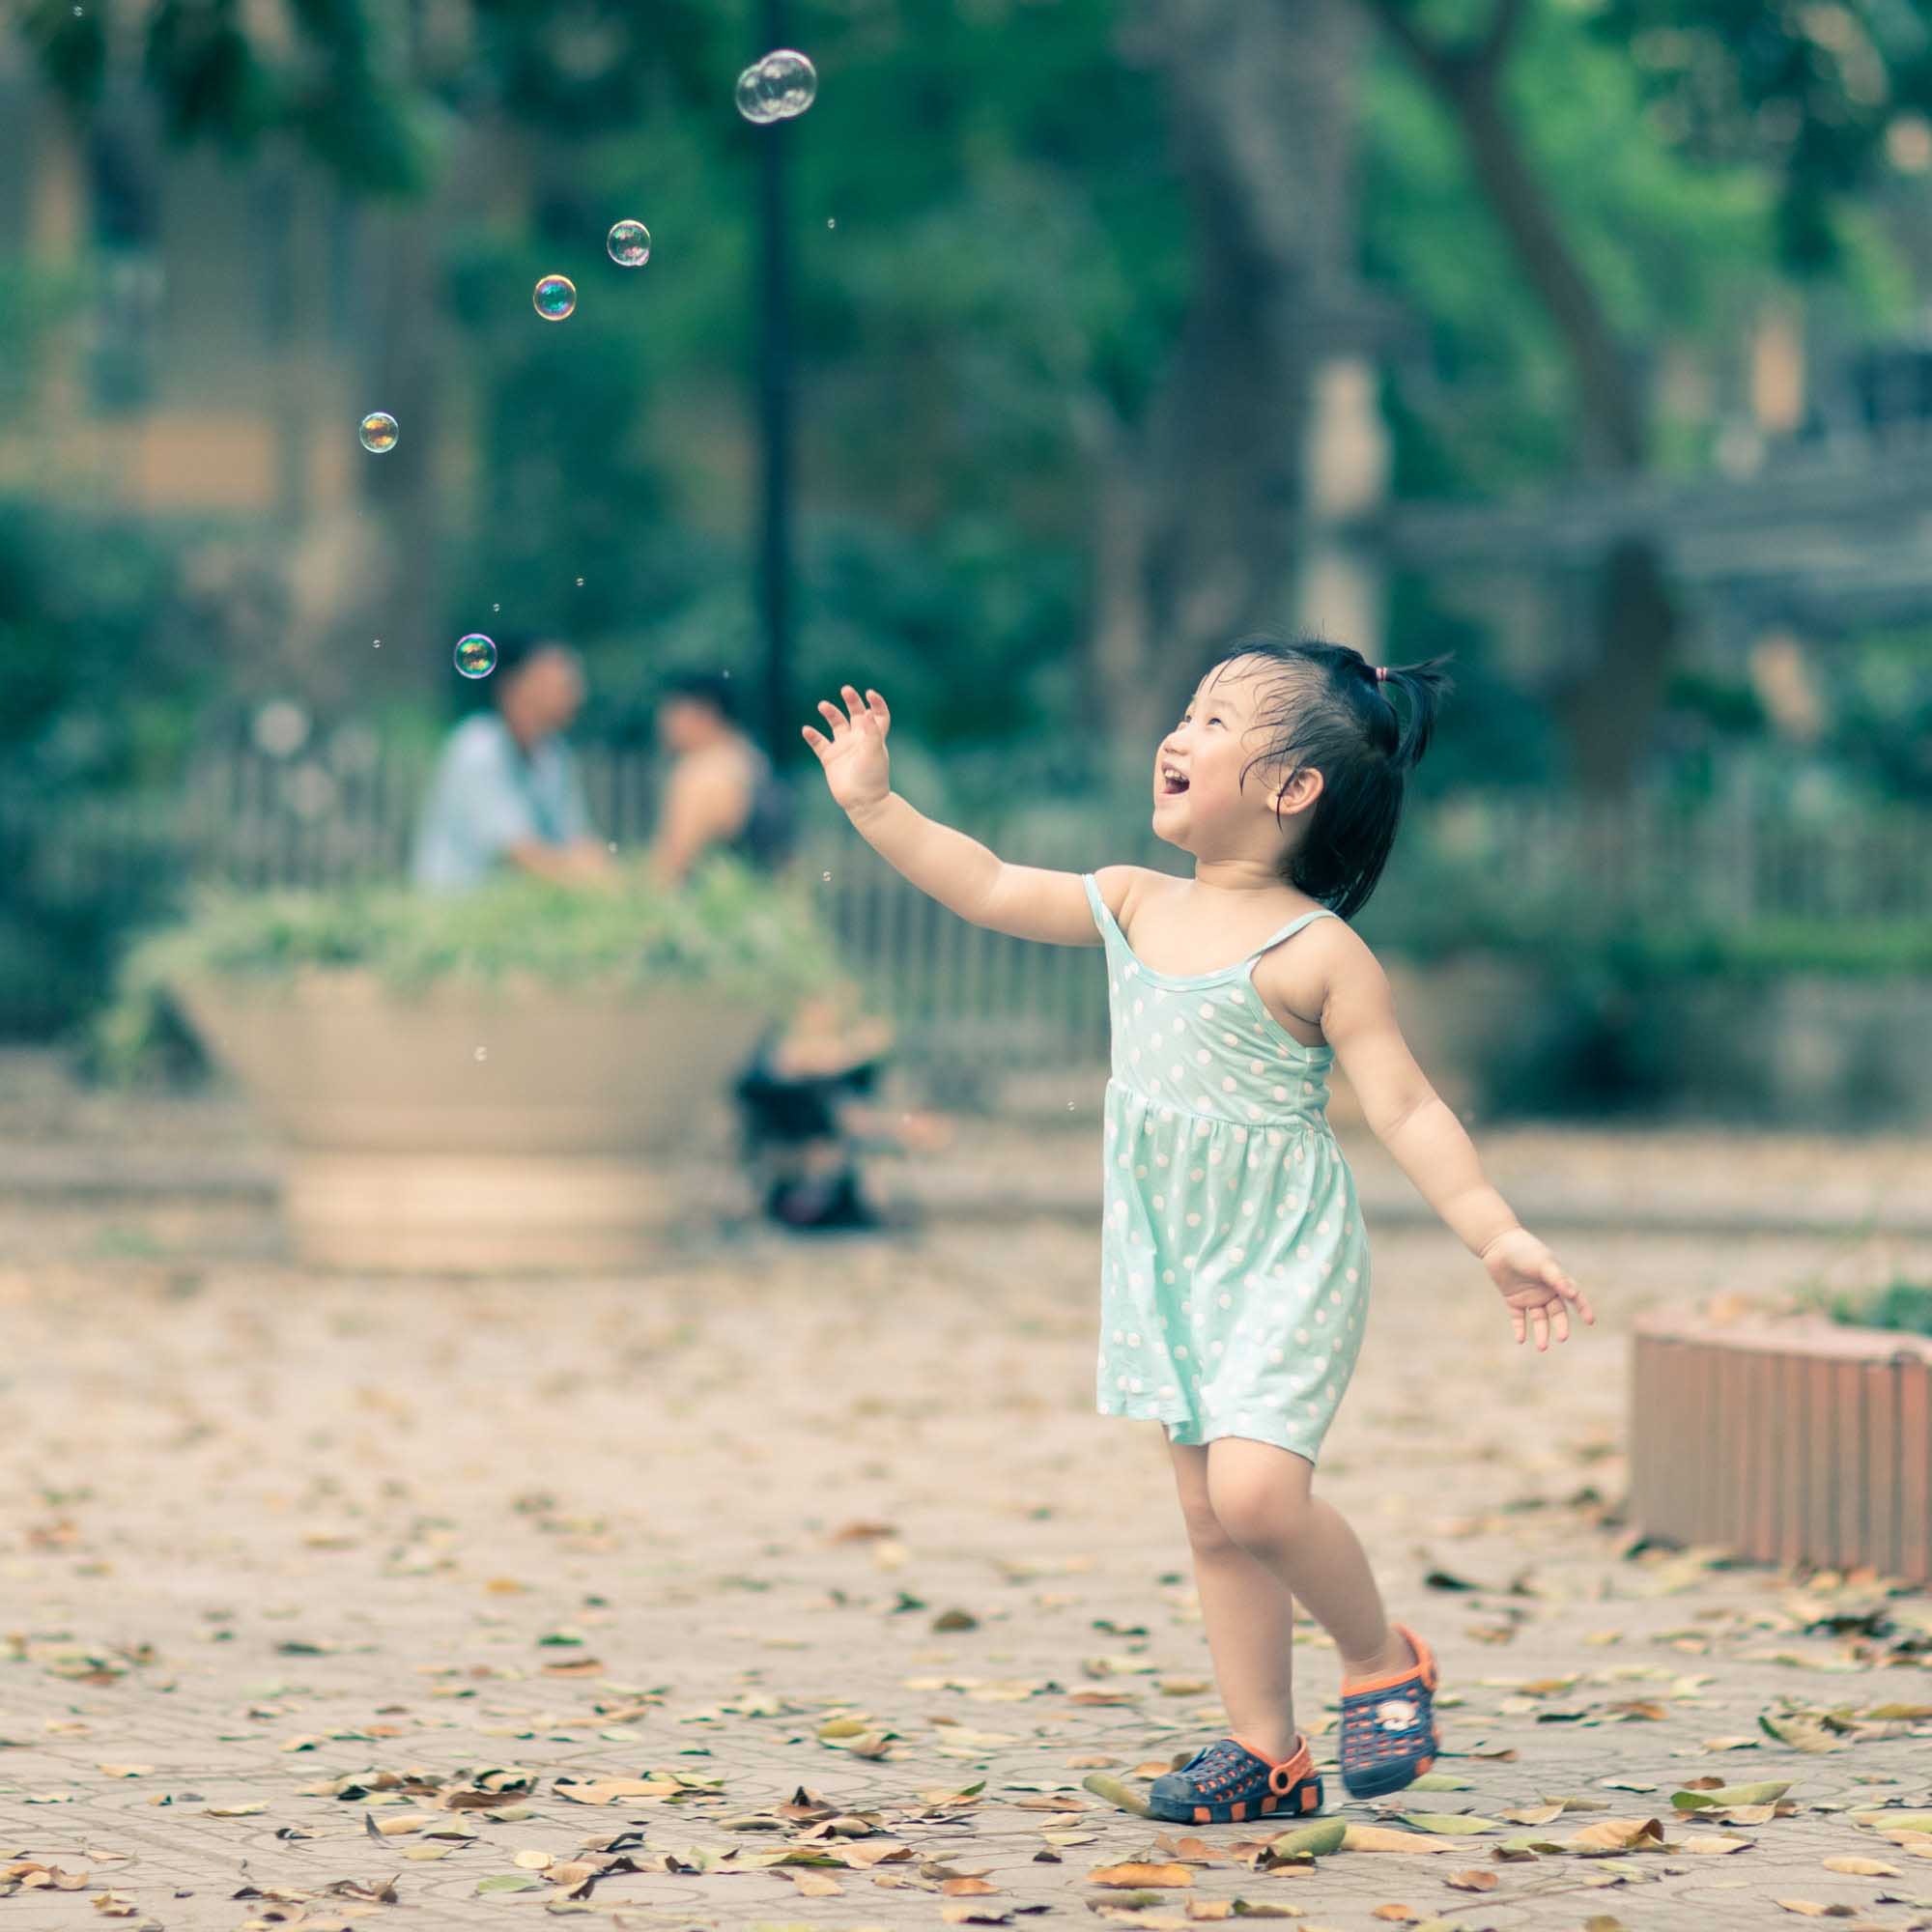 Street Photography of toddler chasing bubbles in a park in Hanoi, Vietnam | Travel Photography